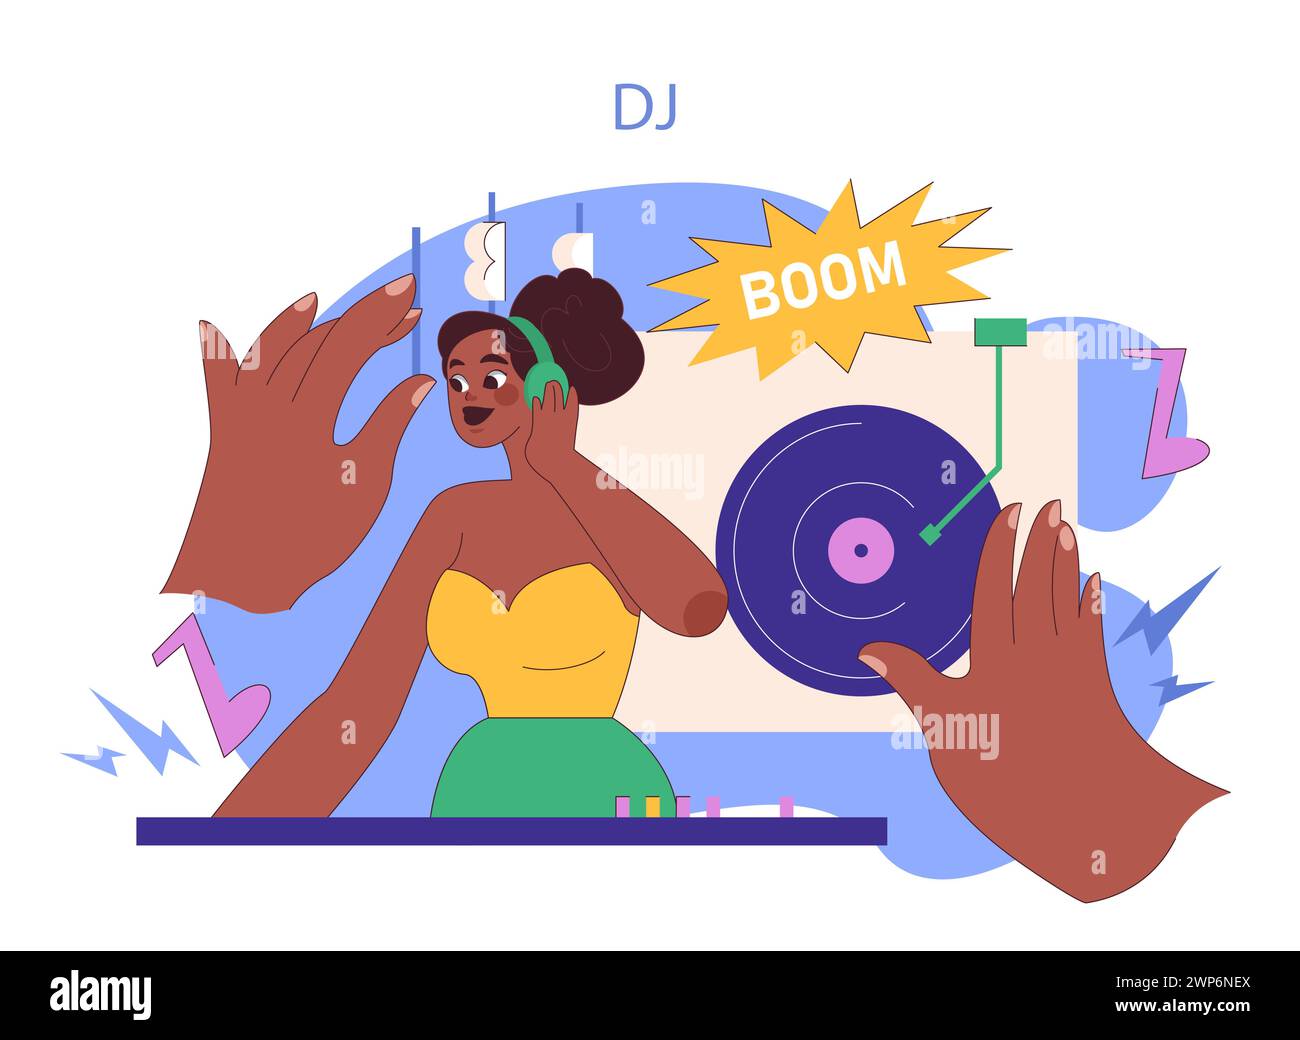 Dynamic DJ at Party concept. Capturing the energetic atmosphere of a live DJ set. Music and entertainment at its peak. Dance floor vibes brought to life. Flat vector illustration Stock Vector